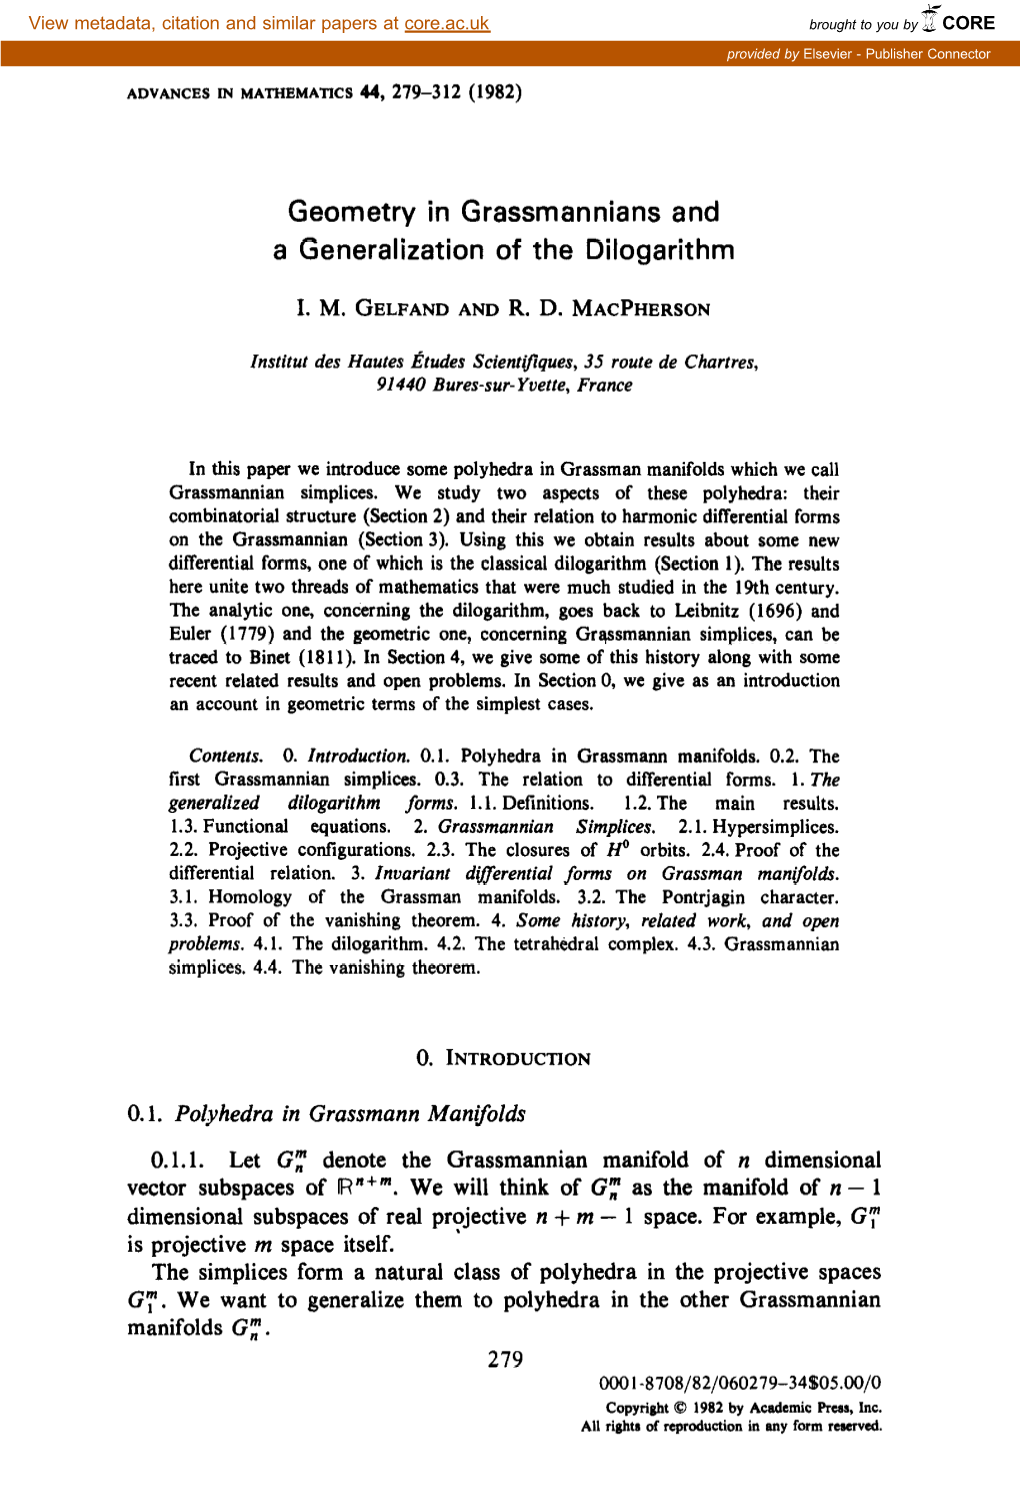 Geometry in Grassmannians and a Generalization of the Dilogarithm